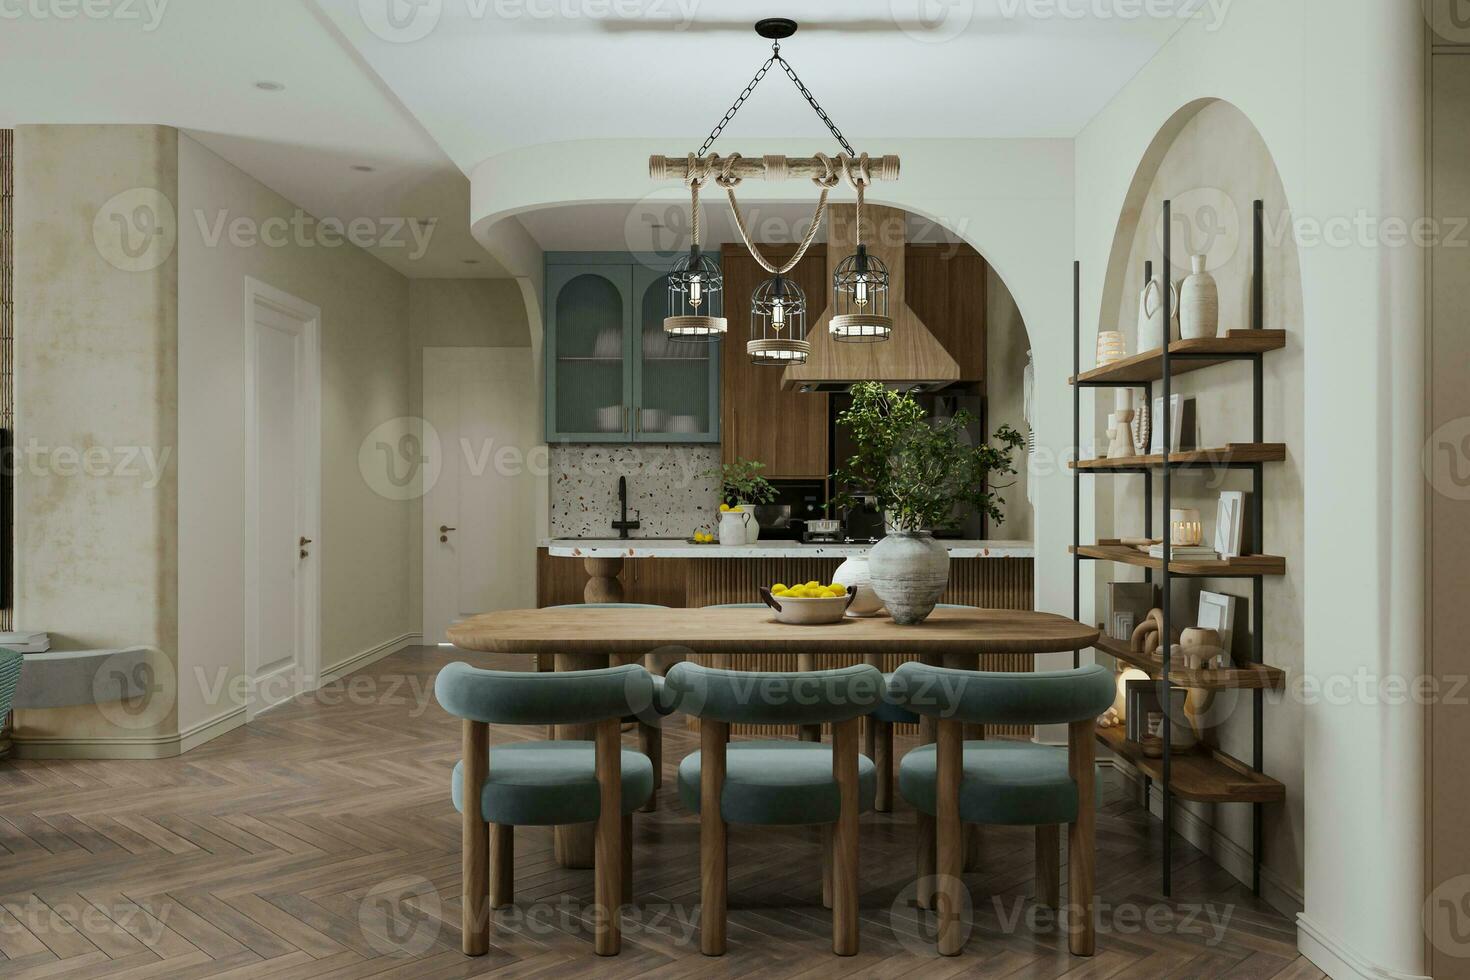 Nest-style lighting pendant hanging over the table, parquet flooring in the studio apartment. photo